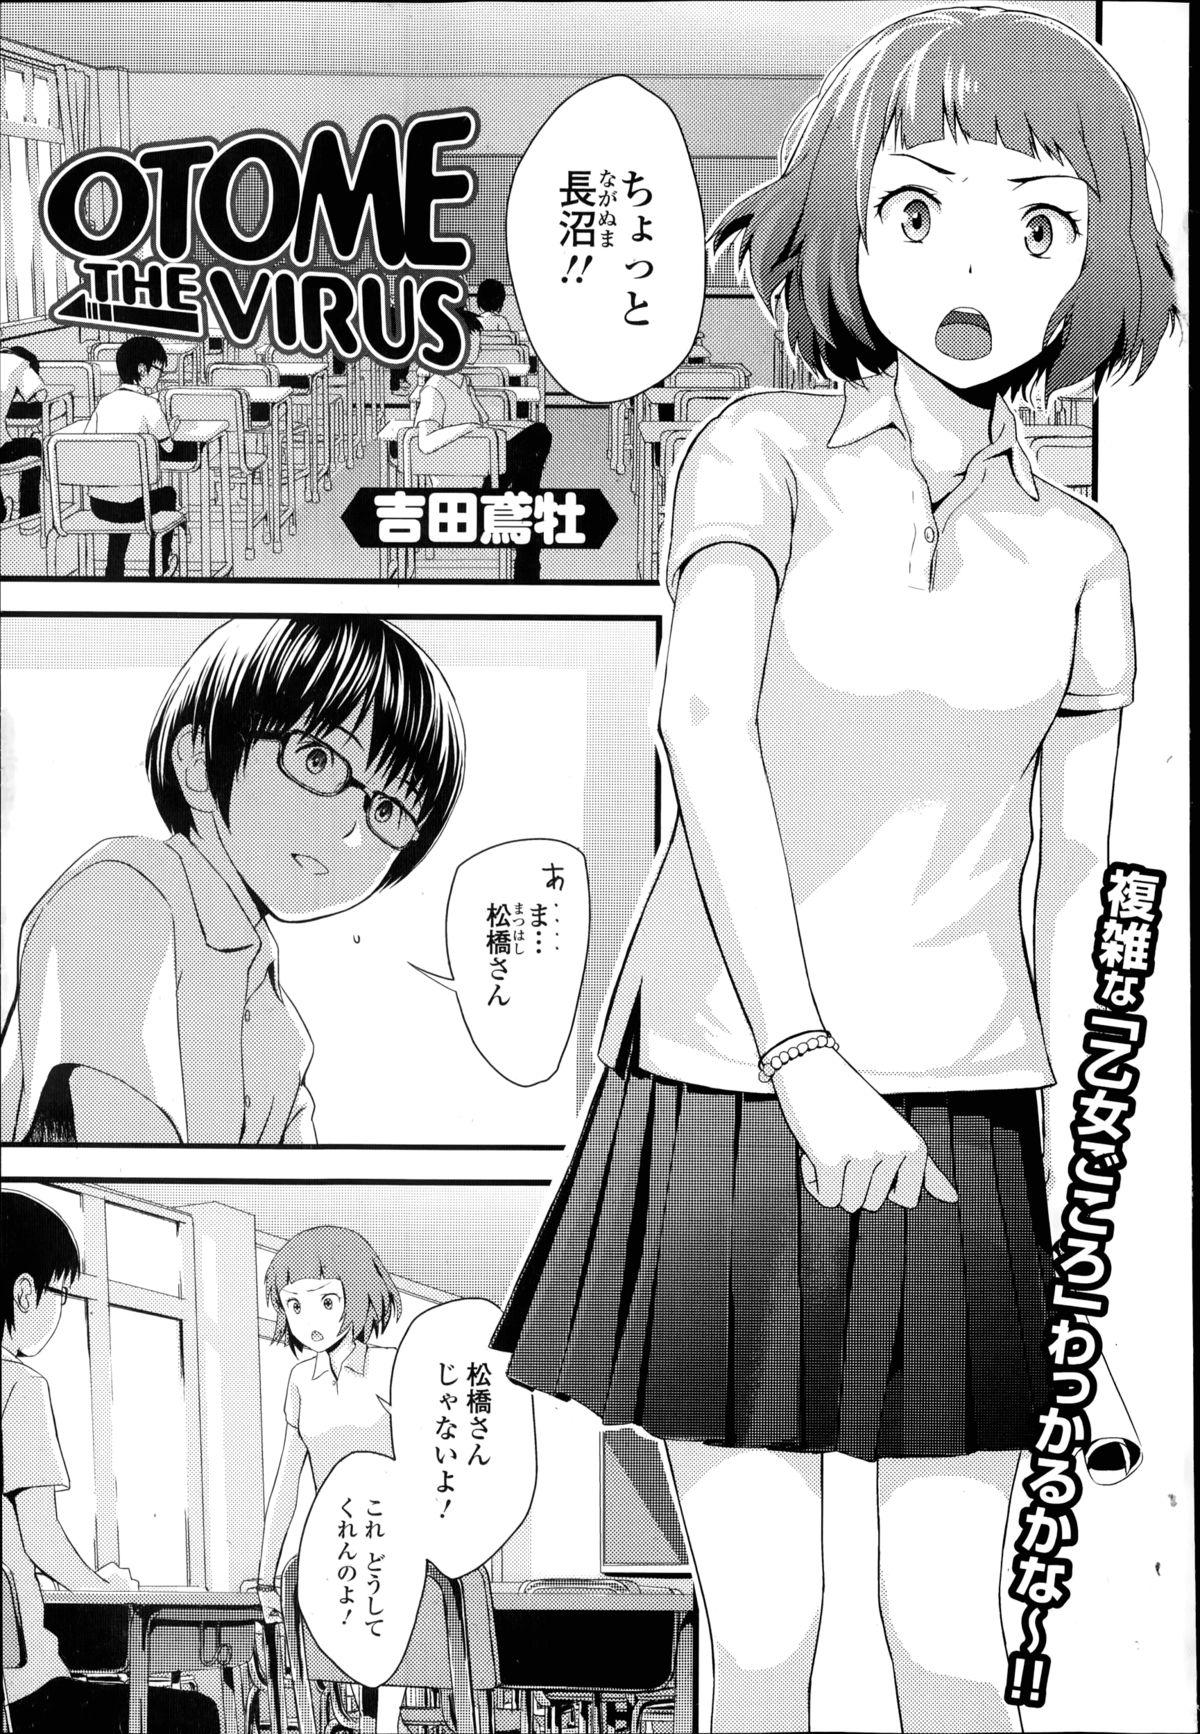 Otome the Virus Ch. 1-2 0